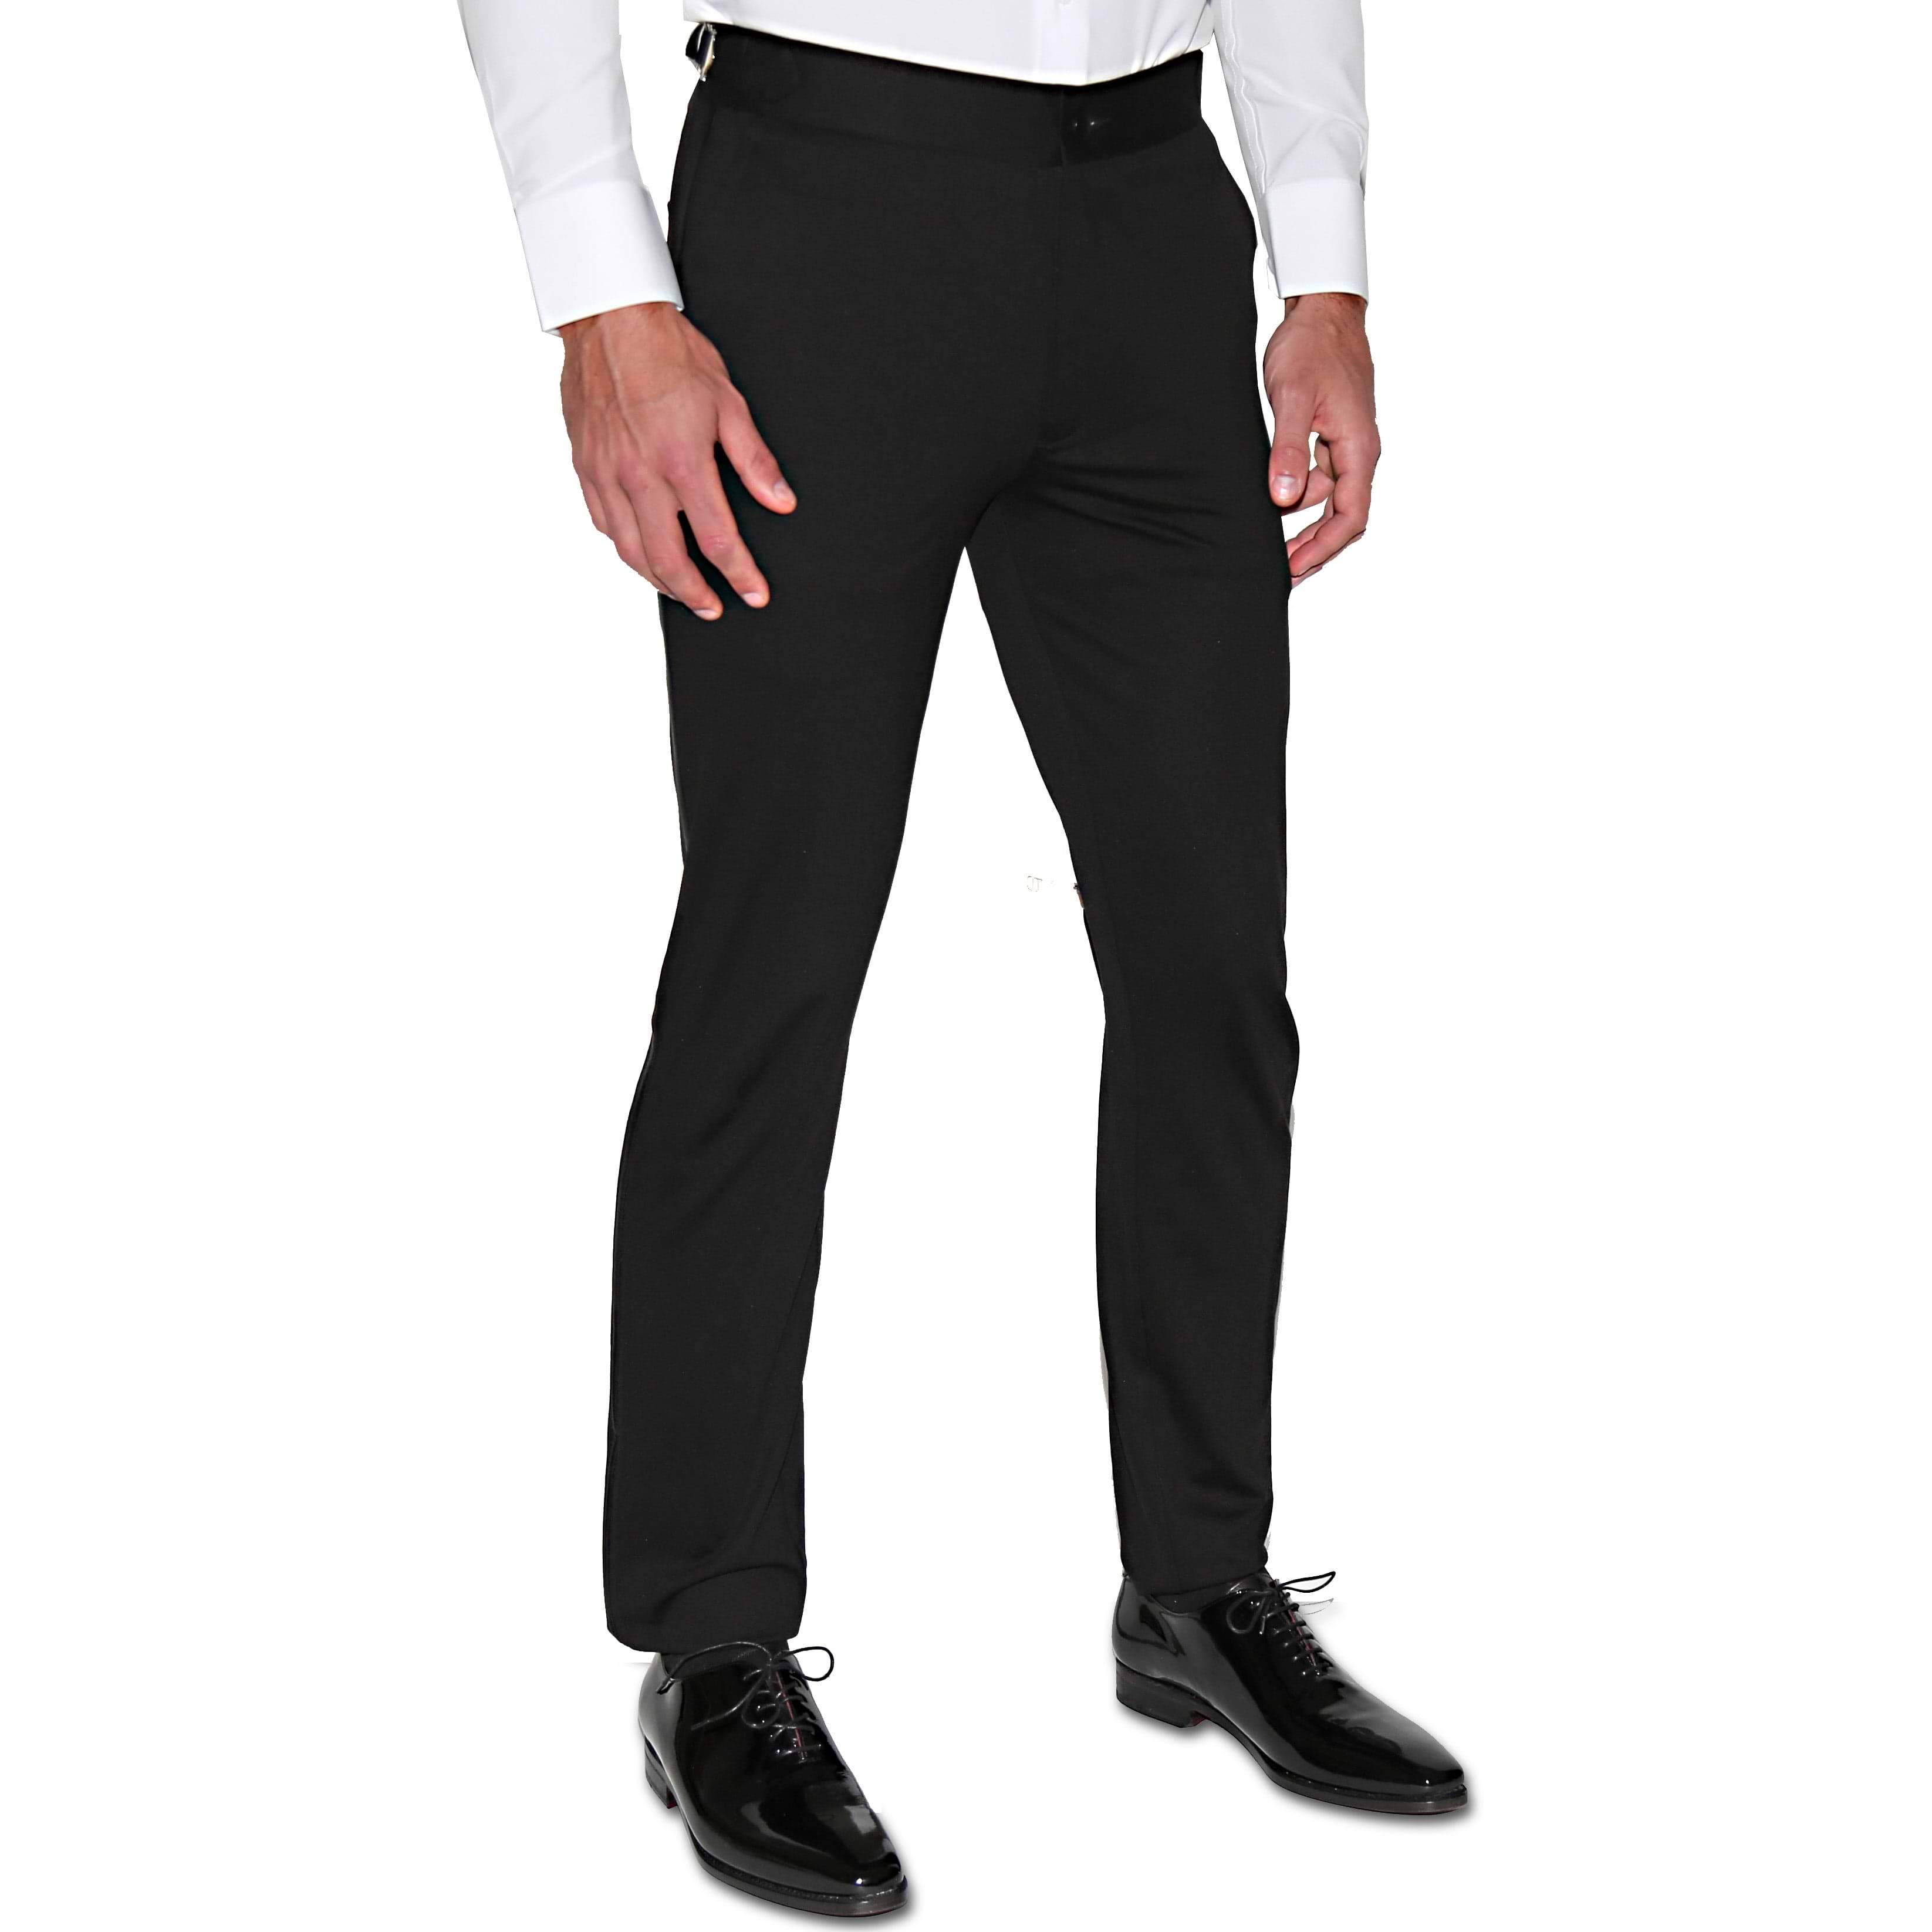 Pencil Cut Formal Trousers For Men Track Pants - Buy Pencil Cut Formal  Trousers For Men Track Pants online in India